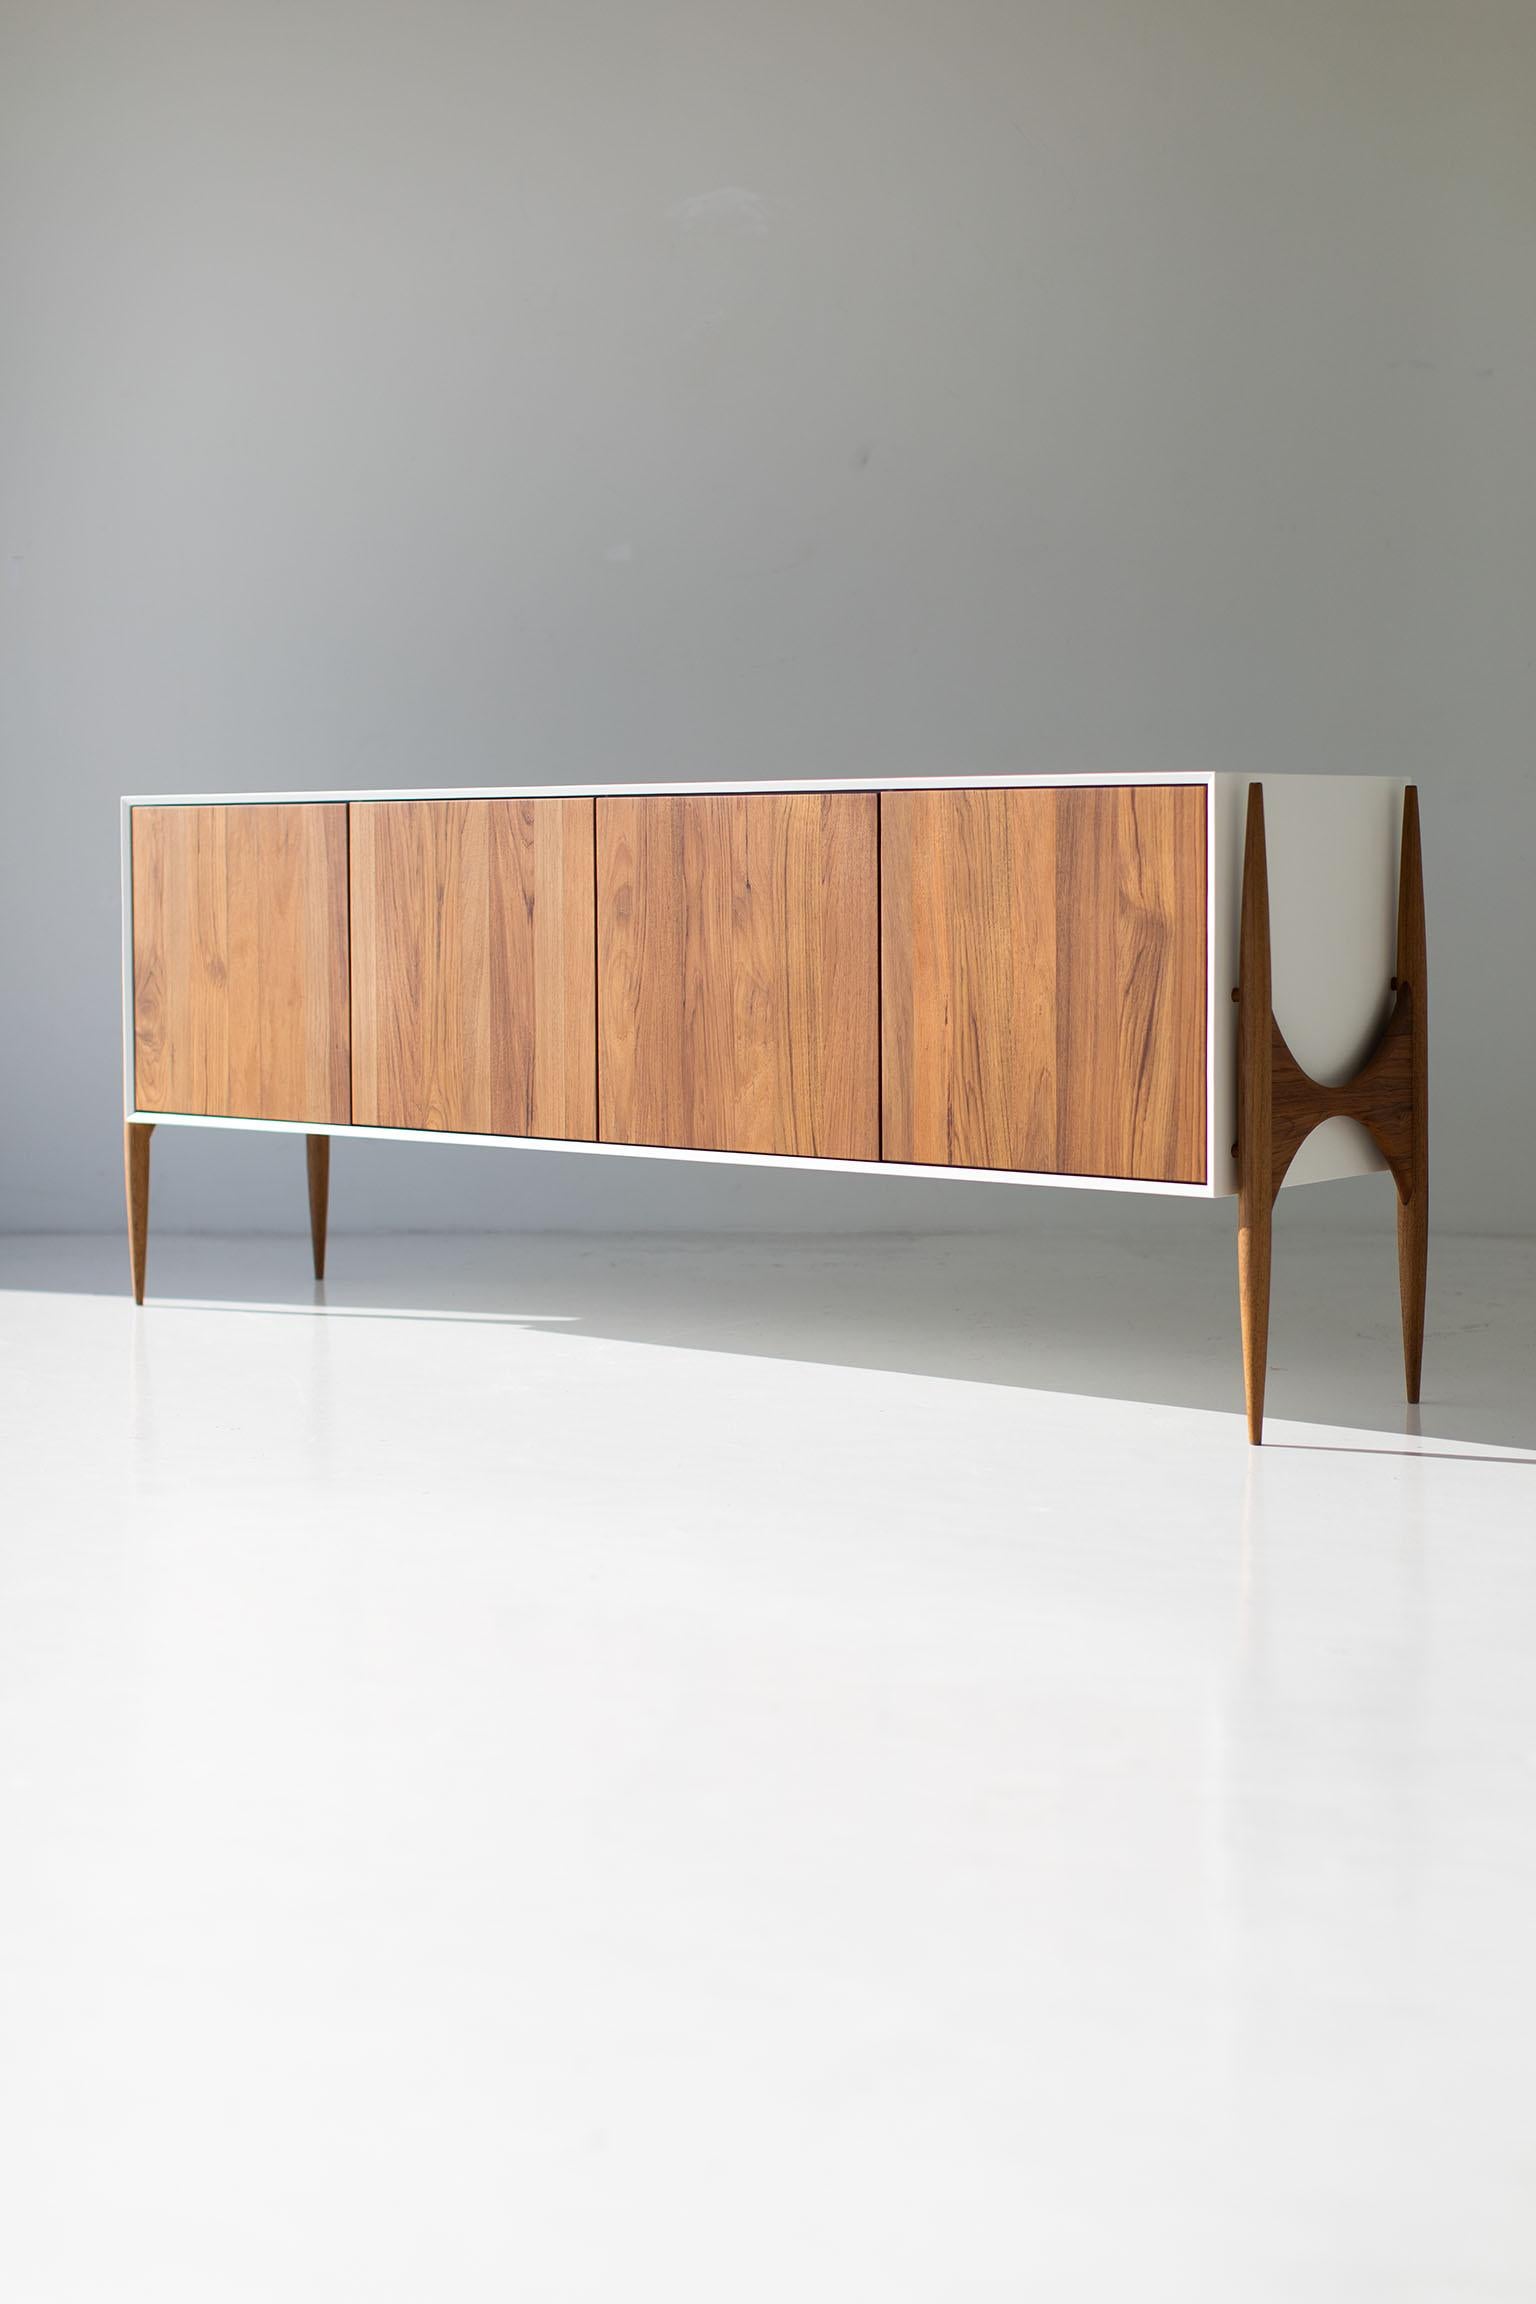 CraftAssociates Sideboard, Cambre Modern Teak Sideboard 

This modern teak credenza from the Cambre Collection for Craft Associates Furniture is expertly crafted. The legs and door fronts are constructed by artisans from solid teak. The frame is